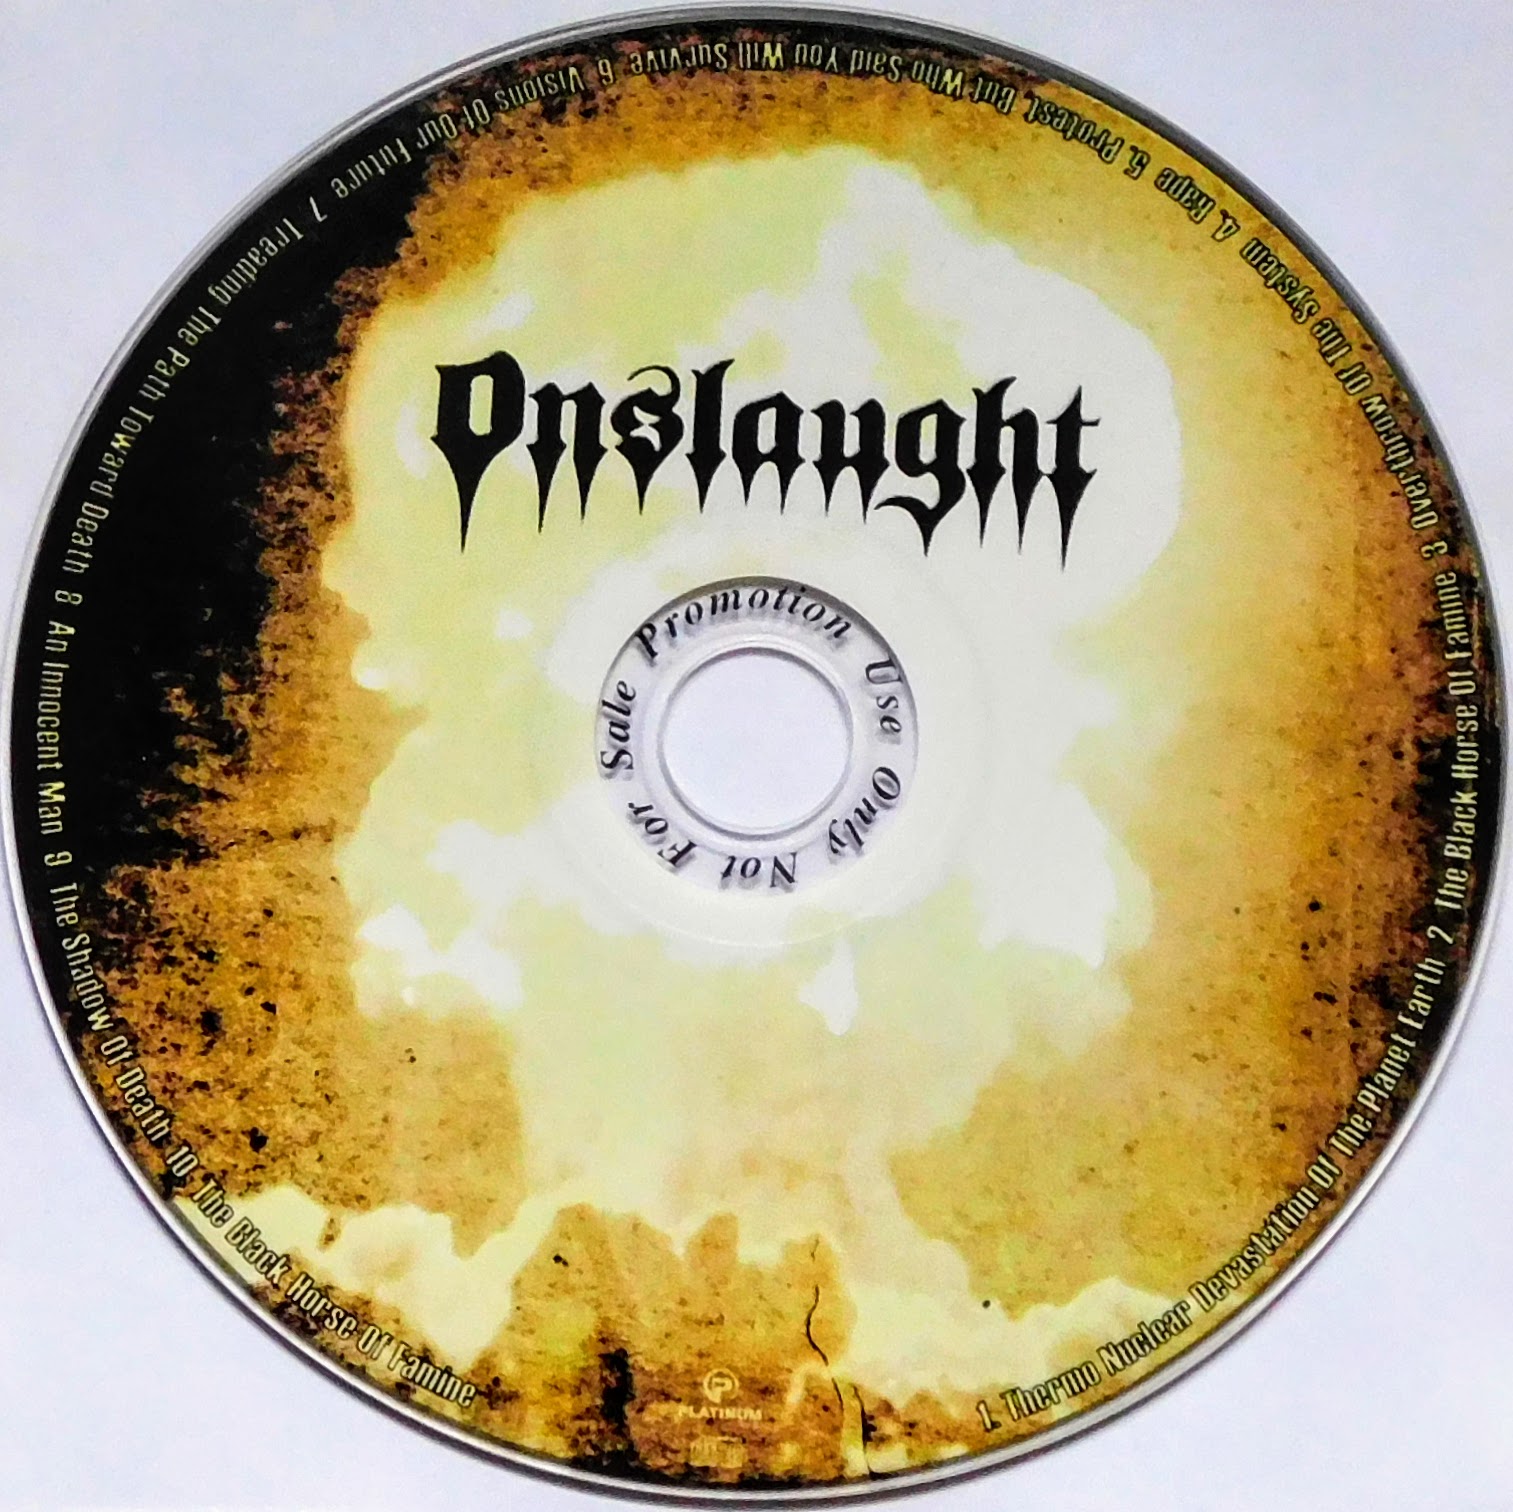 CD (Promotion) Onslaught - The Shadow of Death (CD Only)